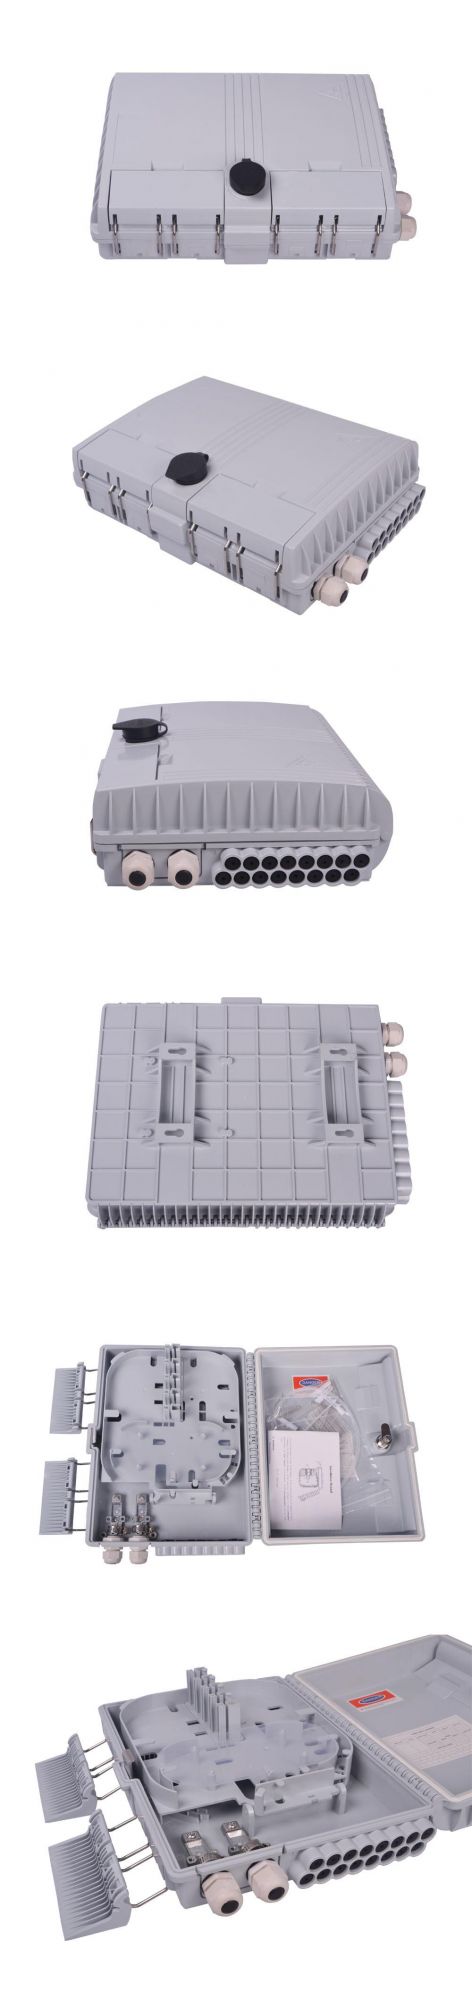 Fiber Access FTTH Terminal Box for Pole Mounting